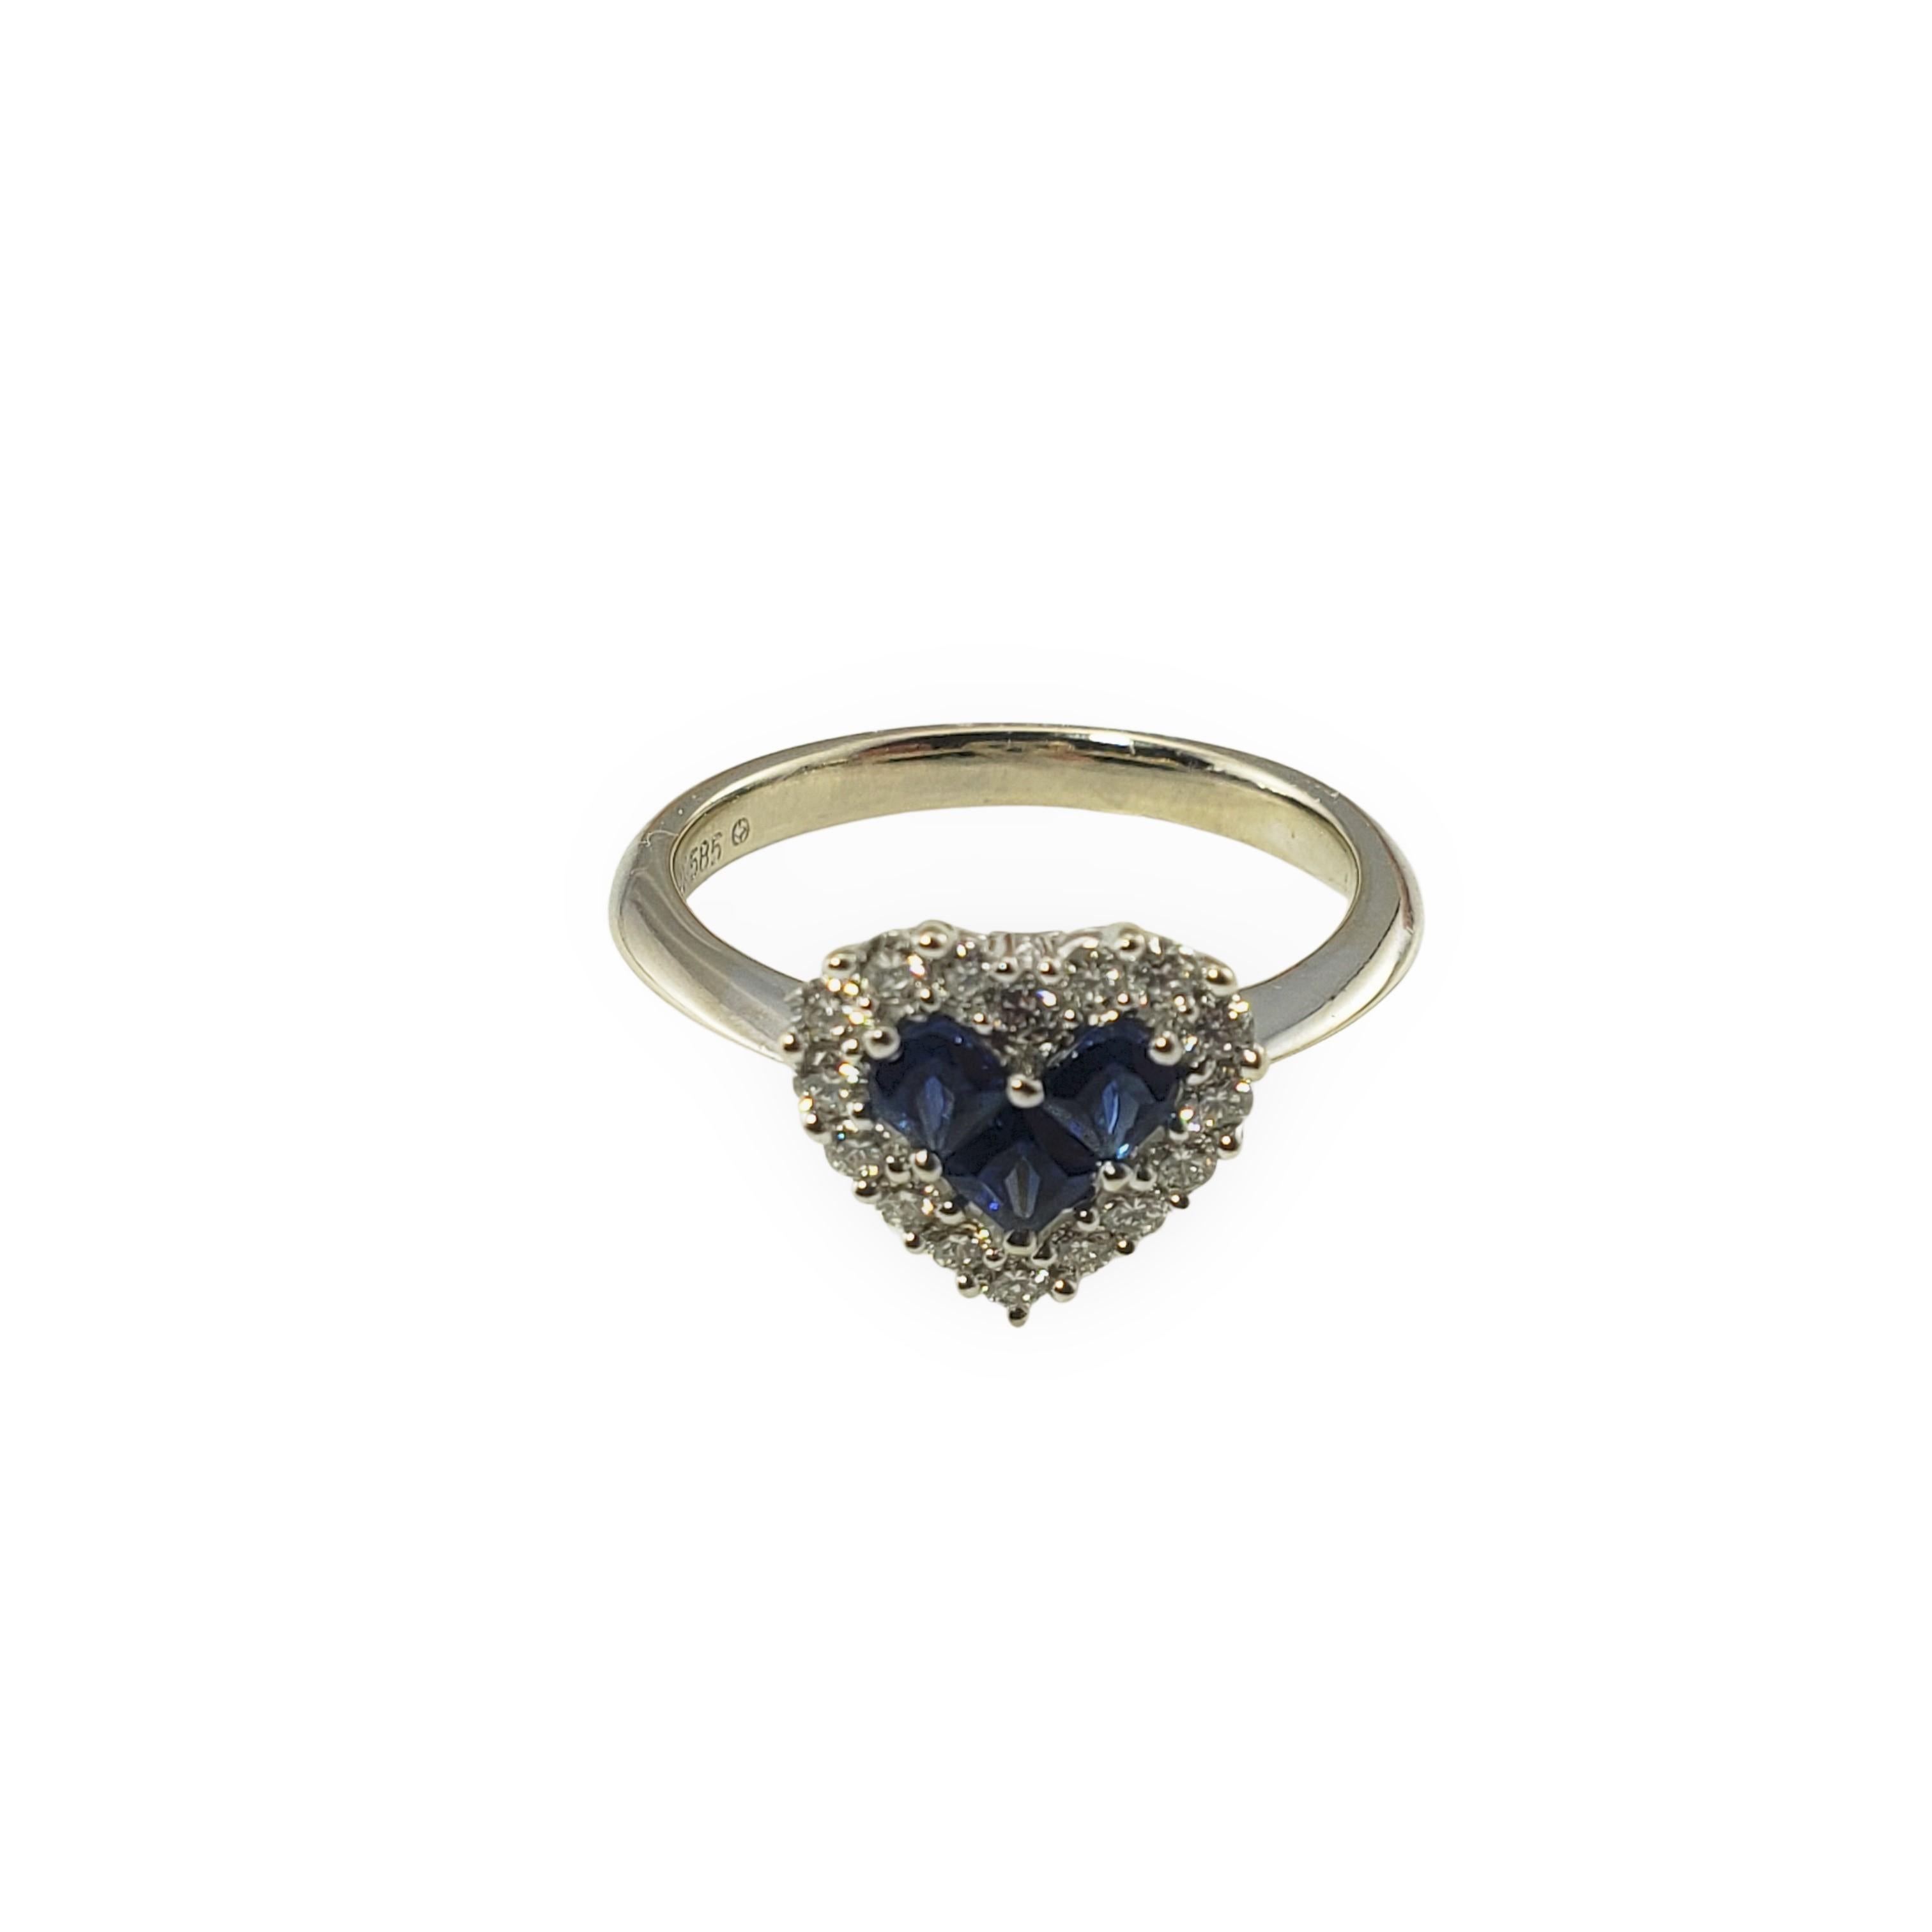 Vintage 14 Karat White Gold Natural Sapphire and Diamond Heart Ring Size 7-

This lovely heart ring features 16 round brilliant cut diamonds and three natural sapphires set in classic 14K white gold.  Width:  10 mm.
Shank:  2.5 mm.

Approximate